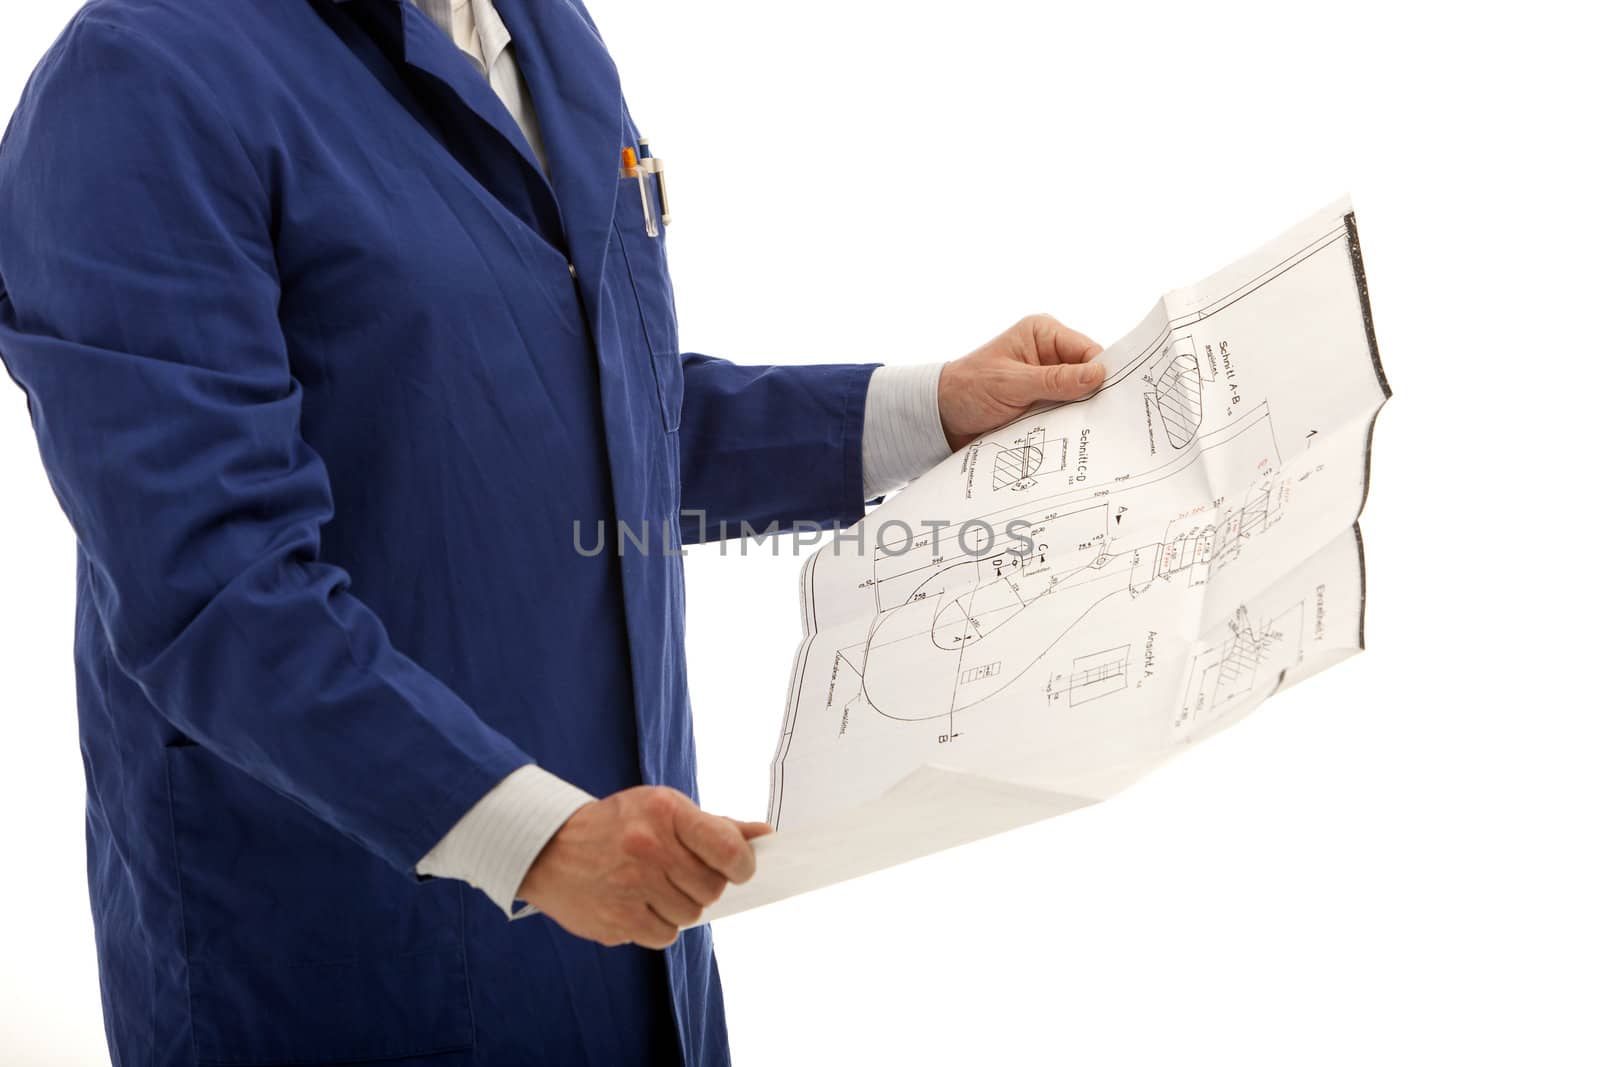 Hands of an engineer or contractor consulting a blueprint drawing isolated on white